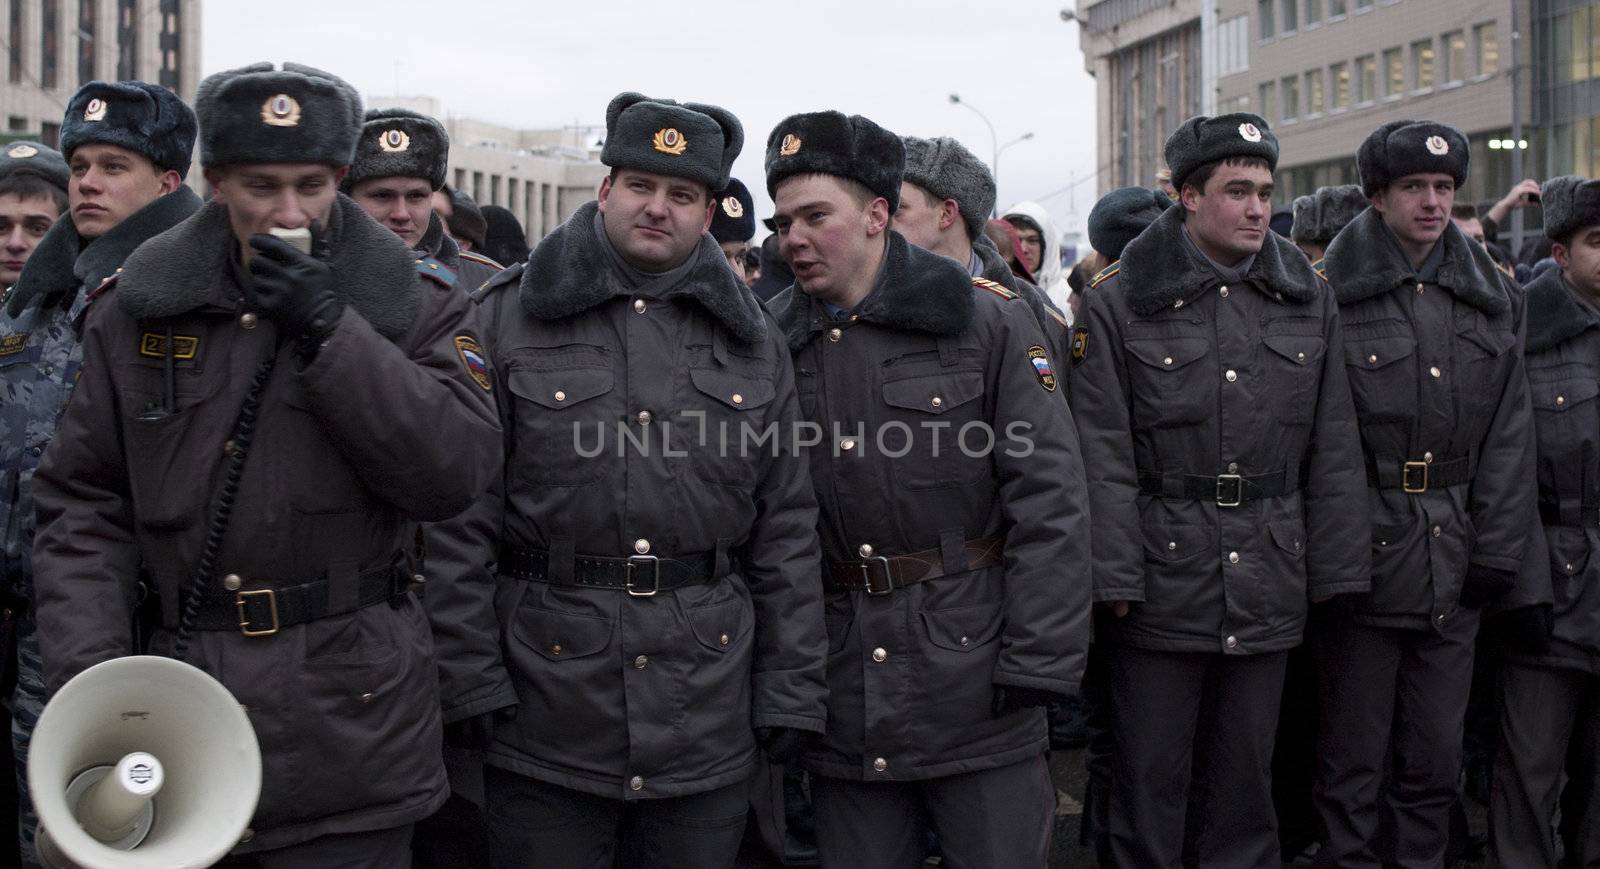 Russia, Moscow - DECEMBER 24: 
Policemen with megaphone at work.
The biggest protest in Russia for the last 20 years. 